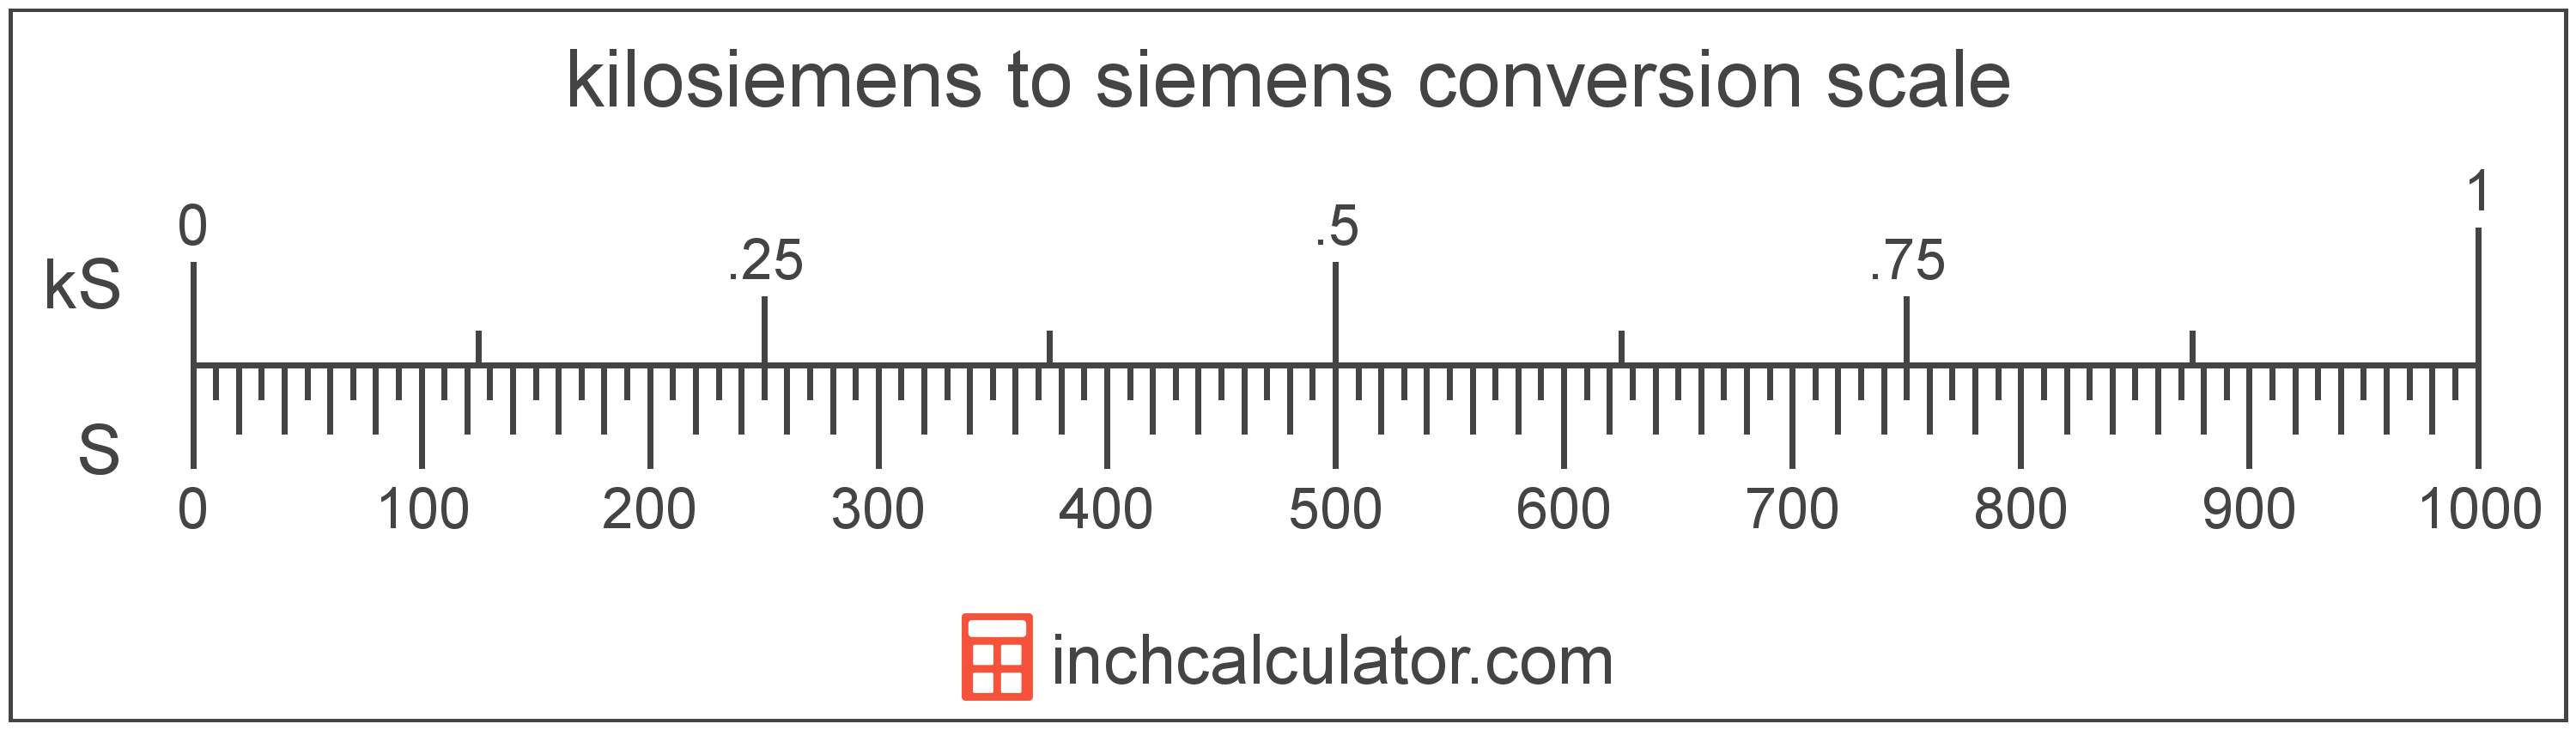 conversion scale showing siemens and equivalent kilosiemens electrical conductance values